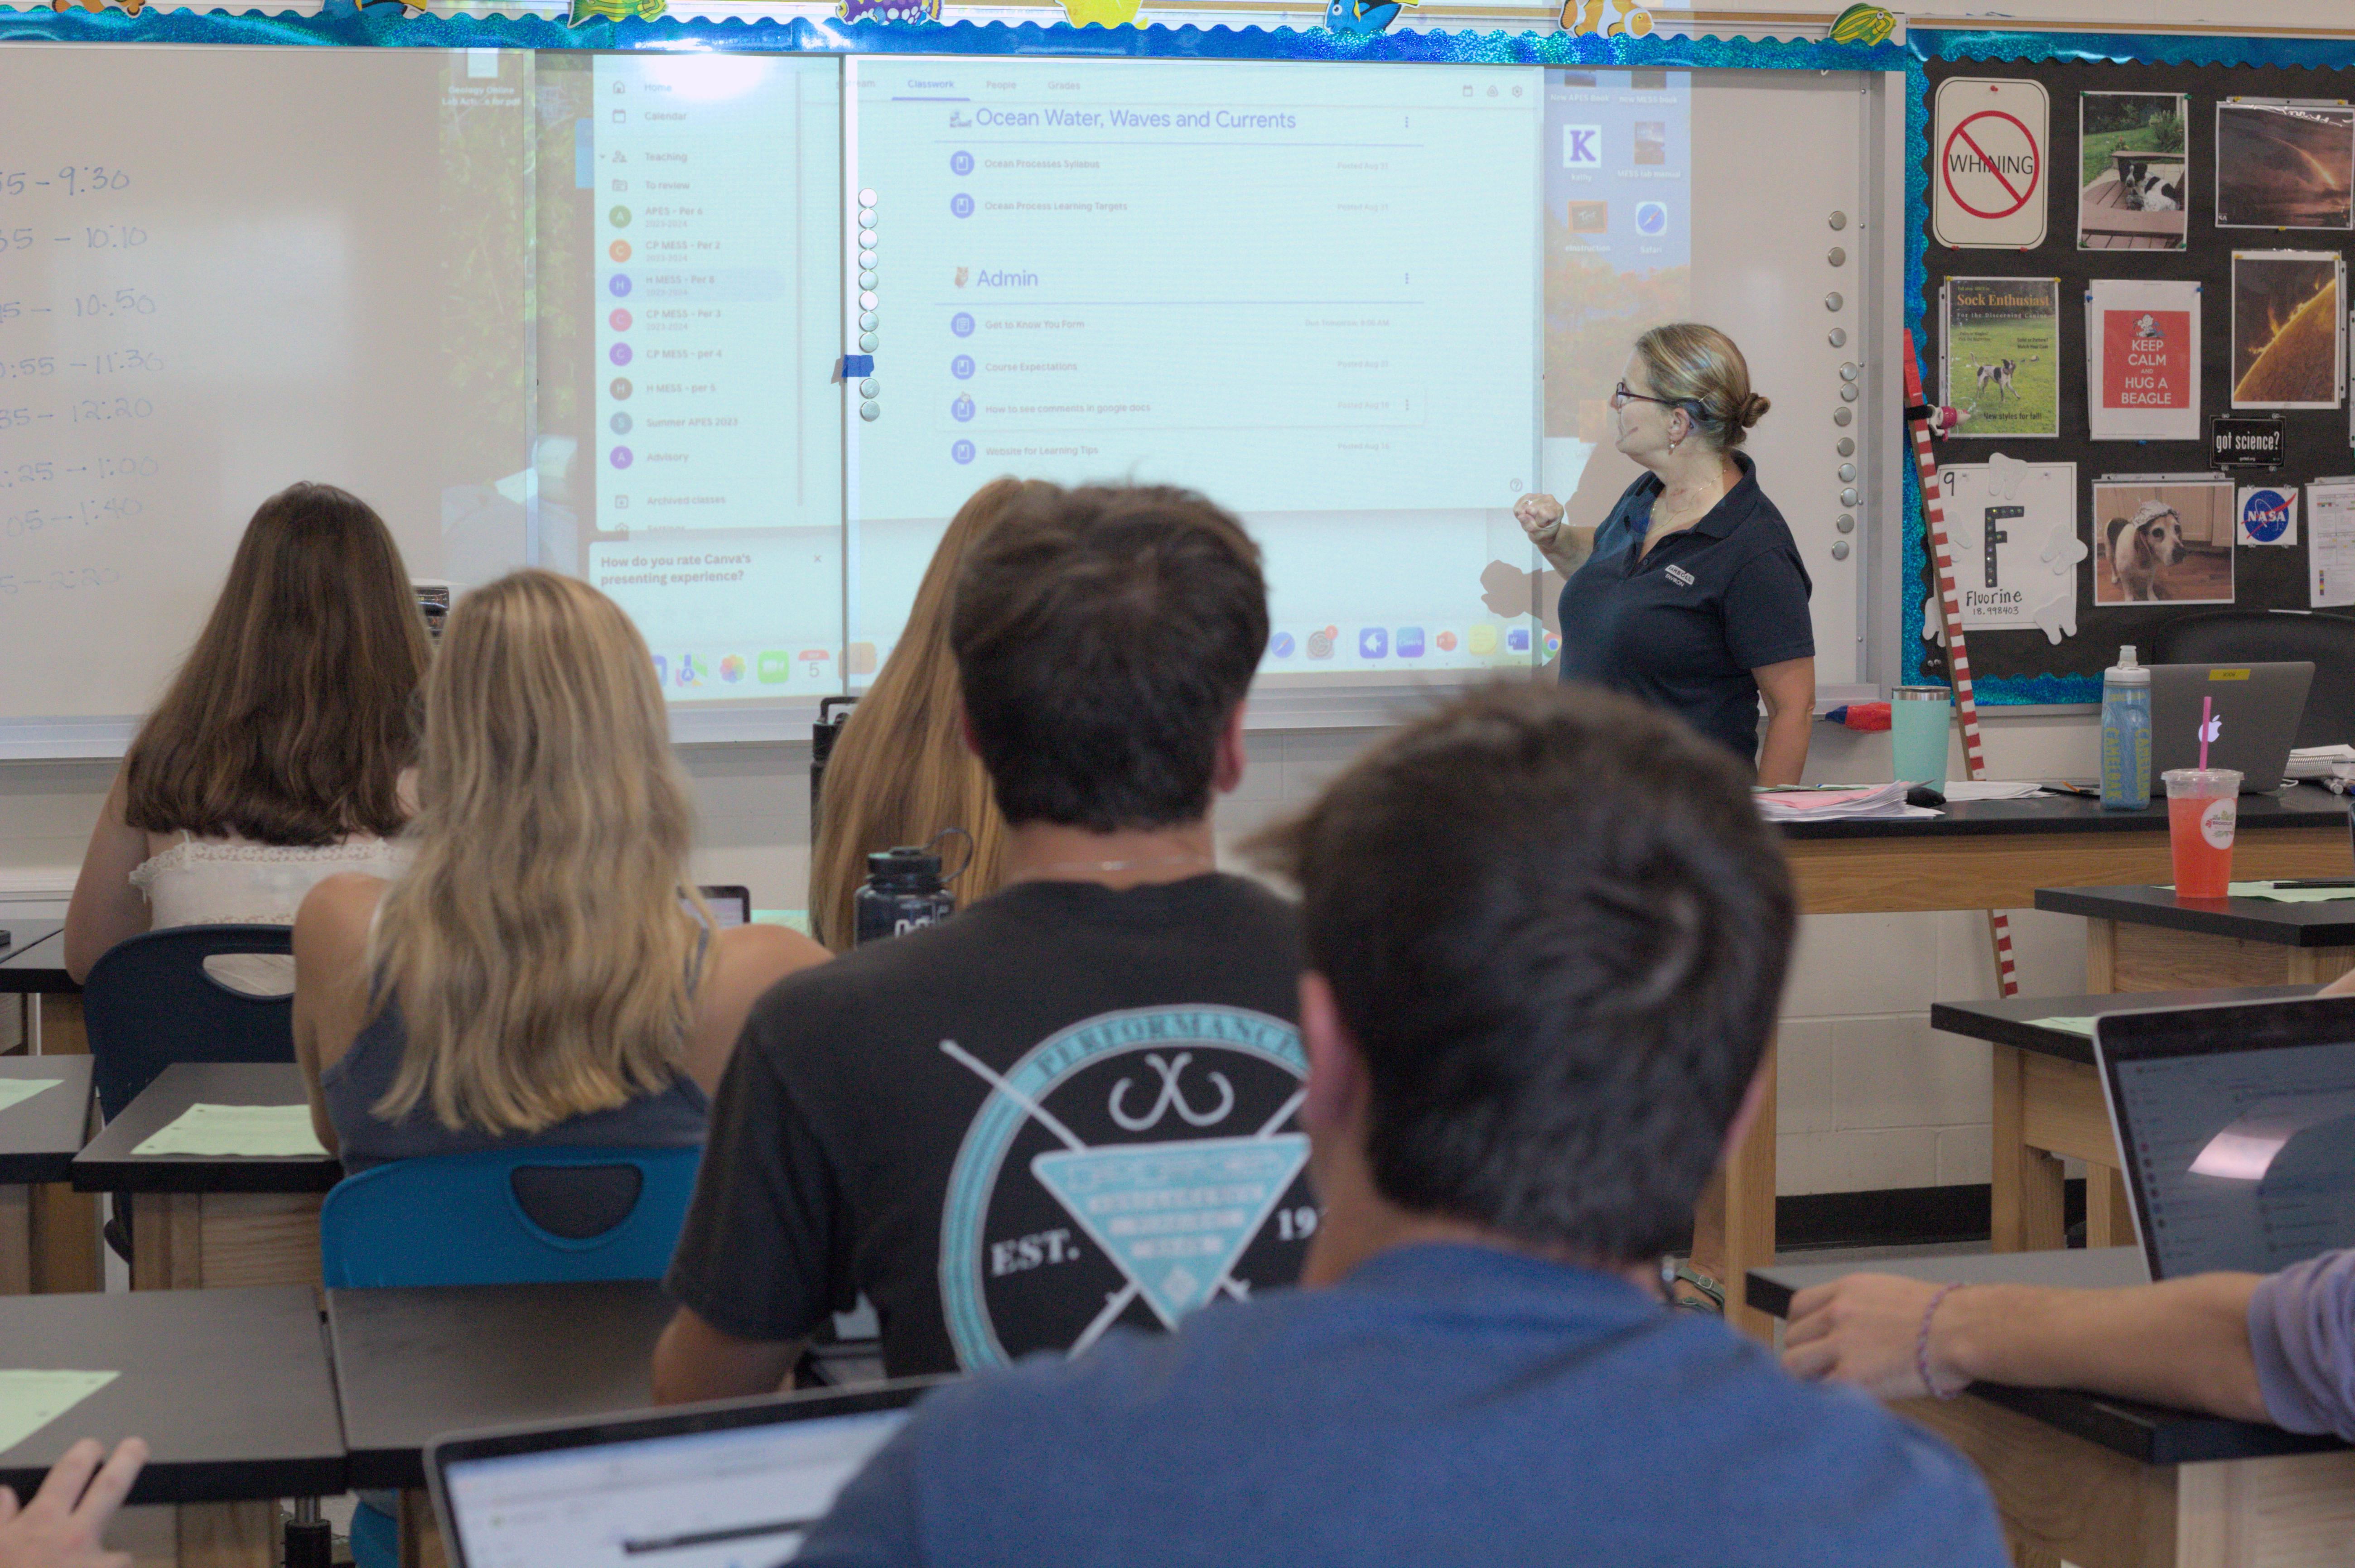 Students look at the whiteboard in a class.